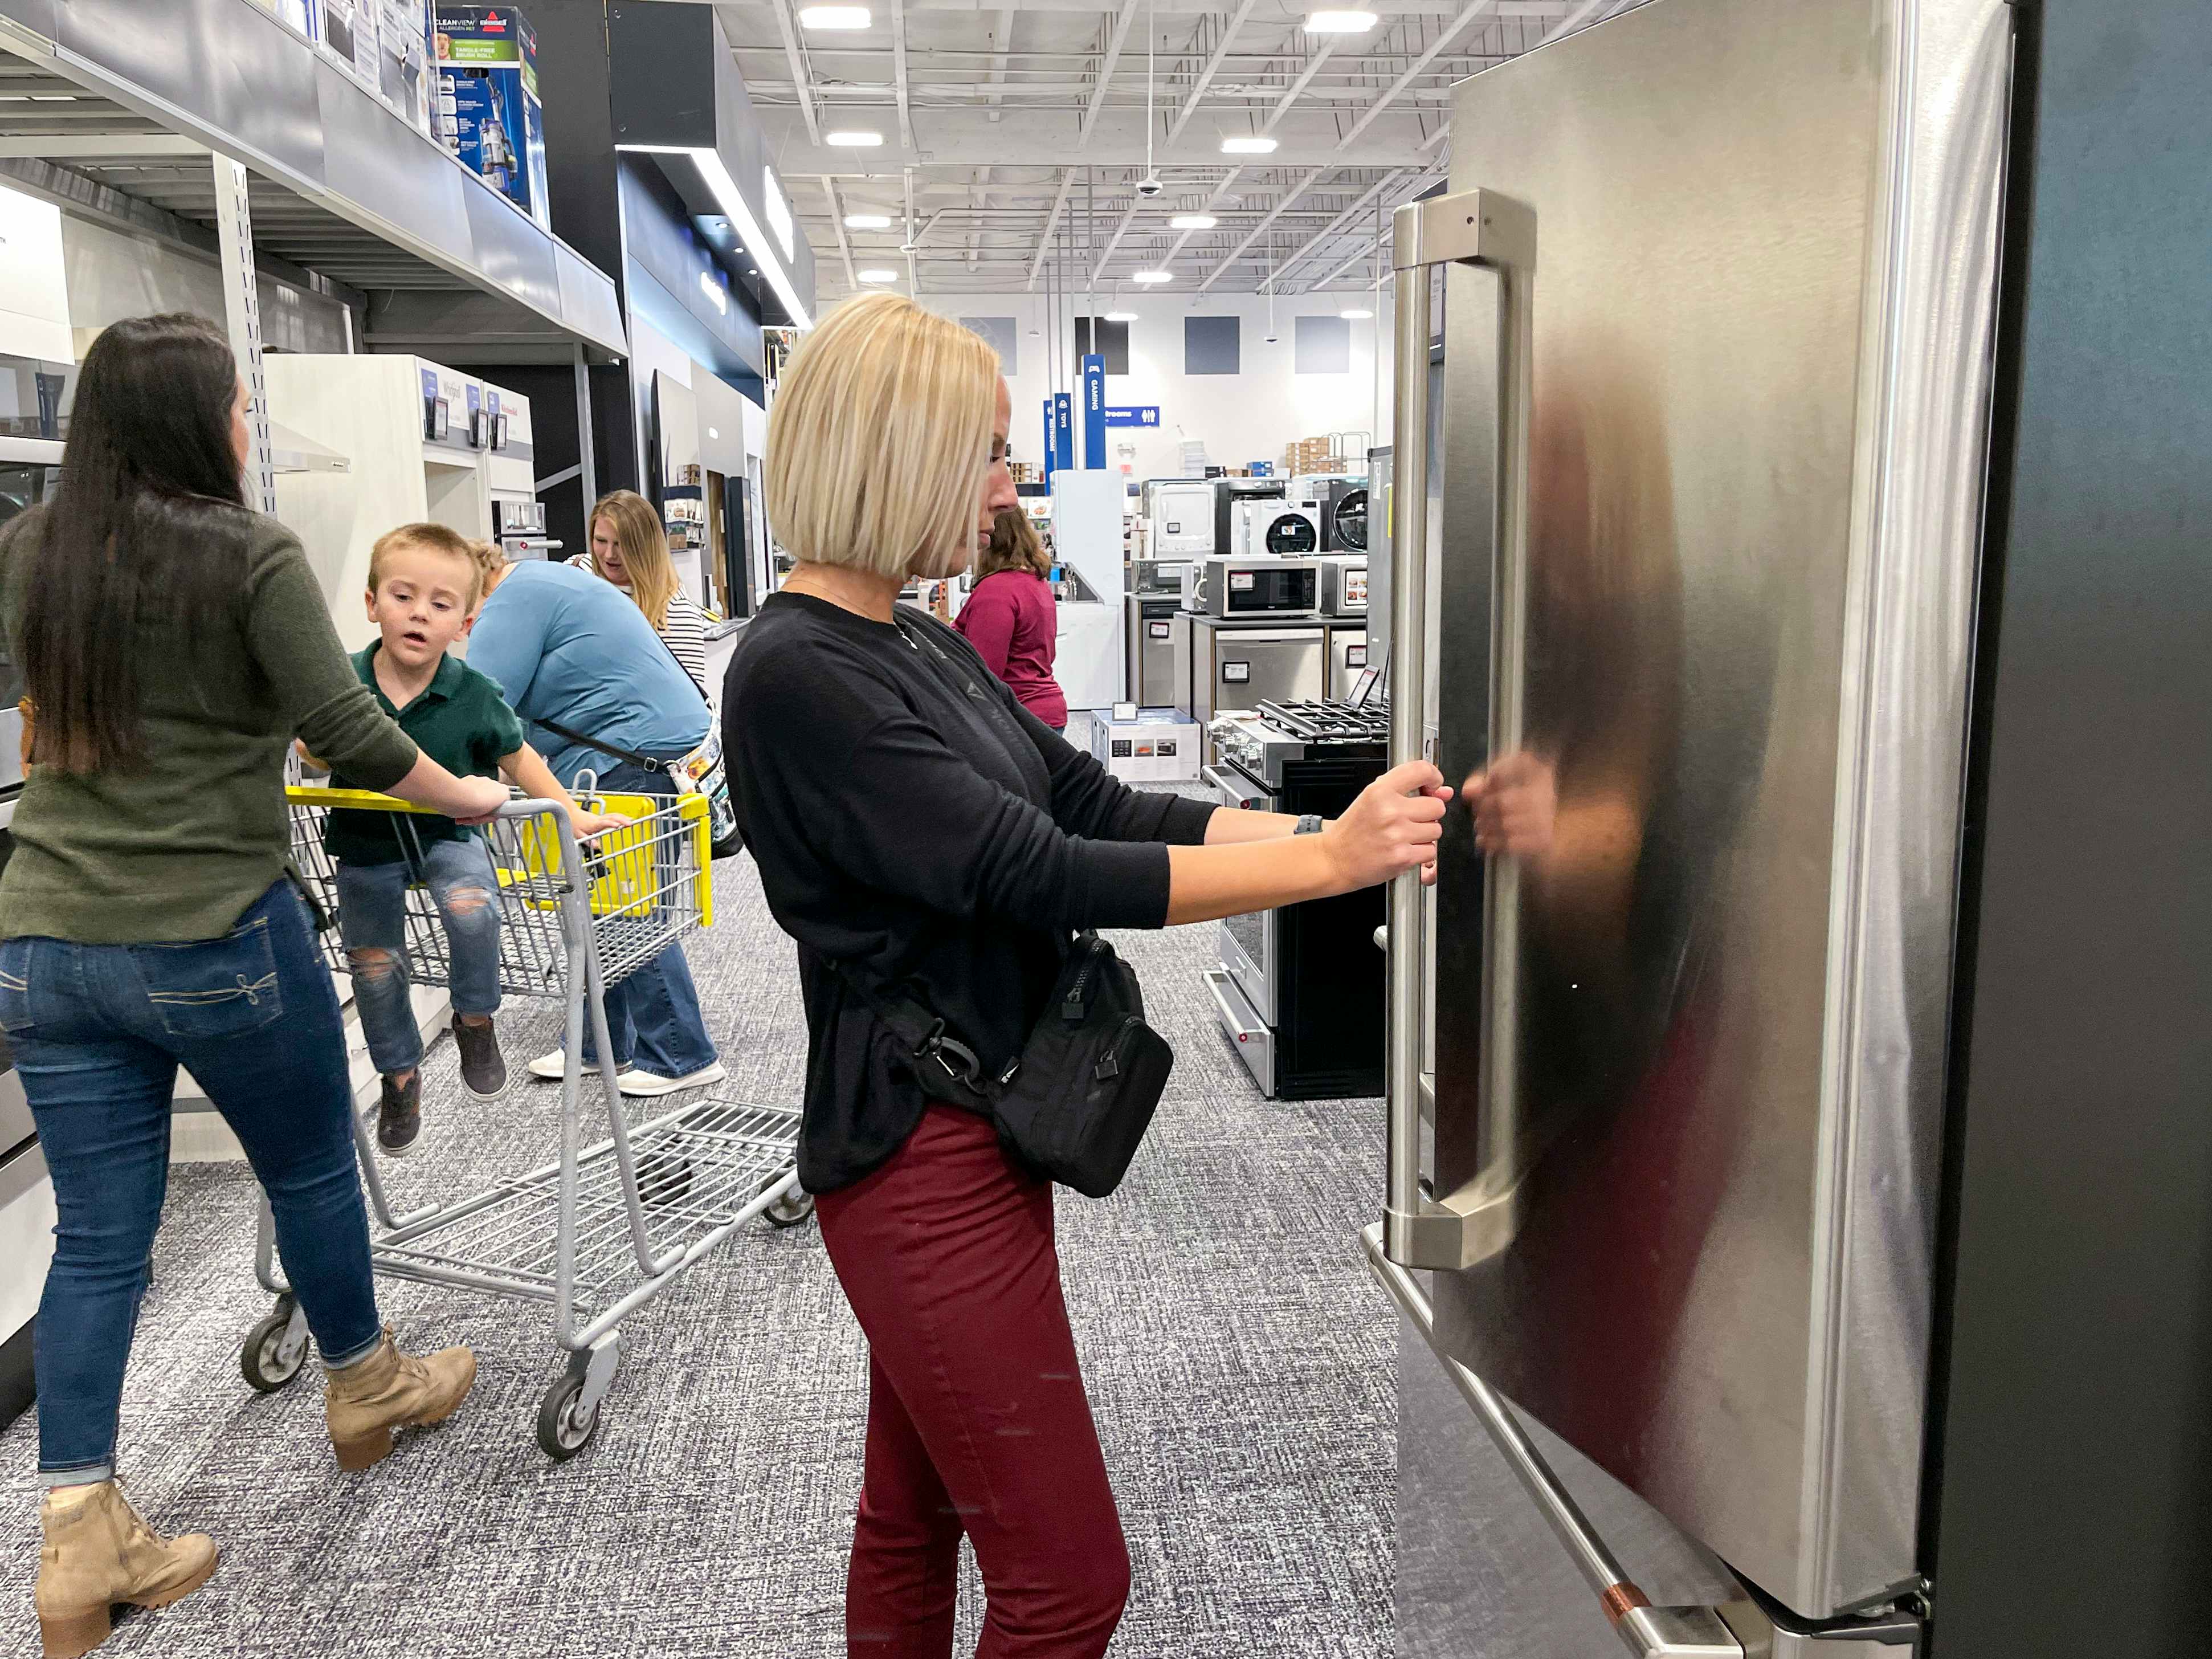 A group of people shopping in the appliance section at best buy.